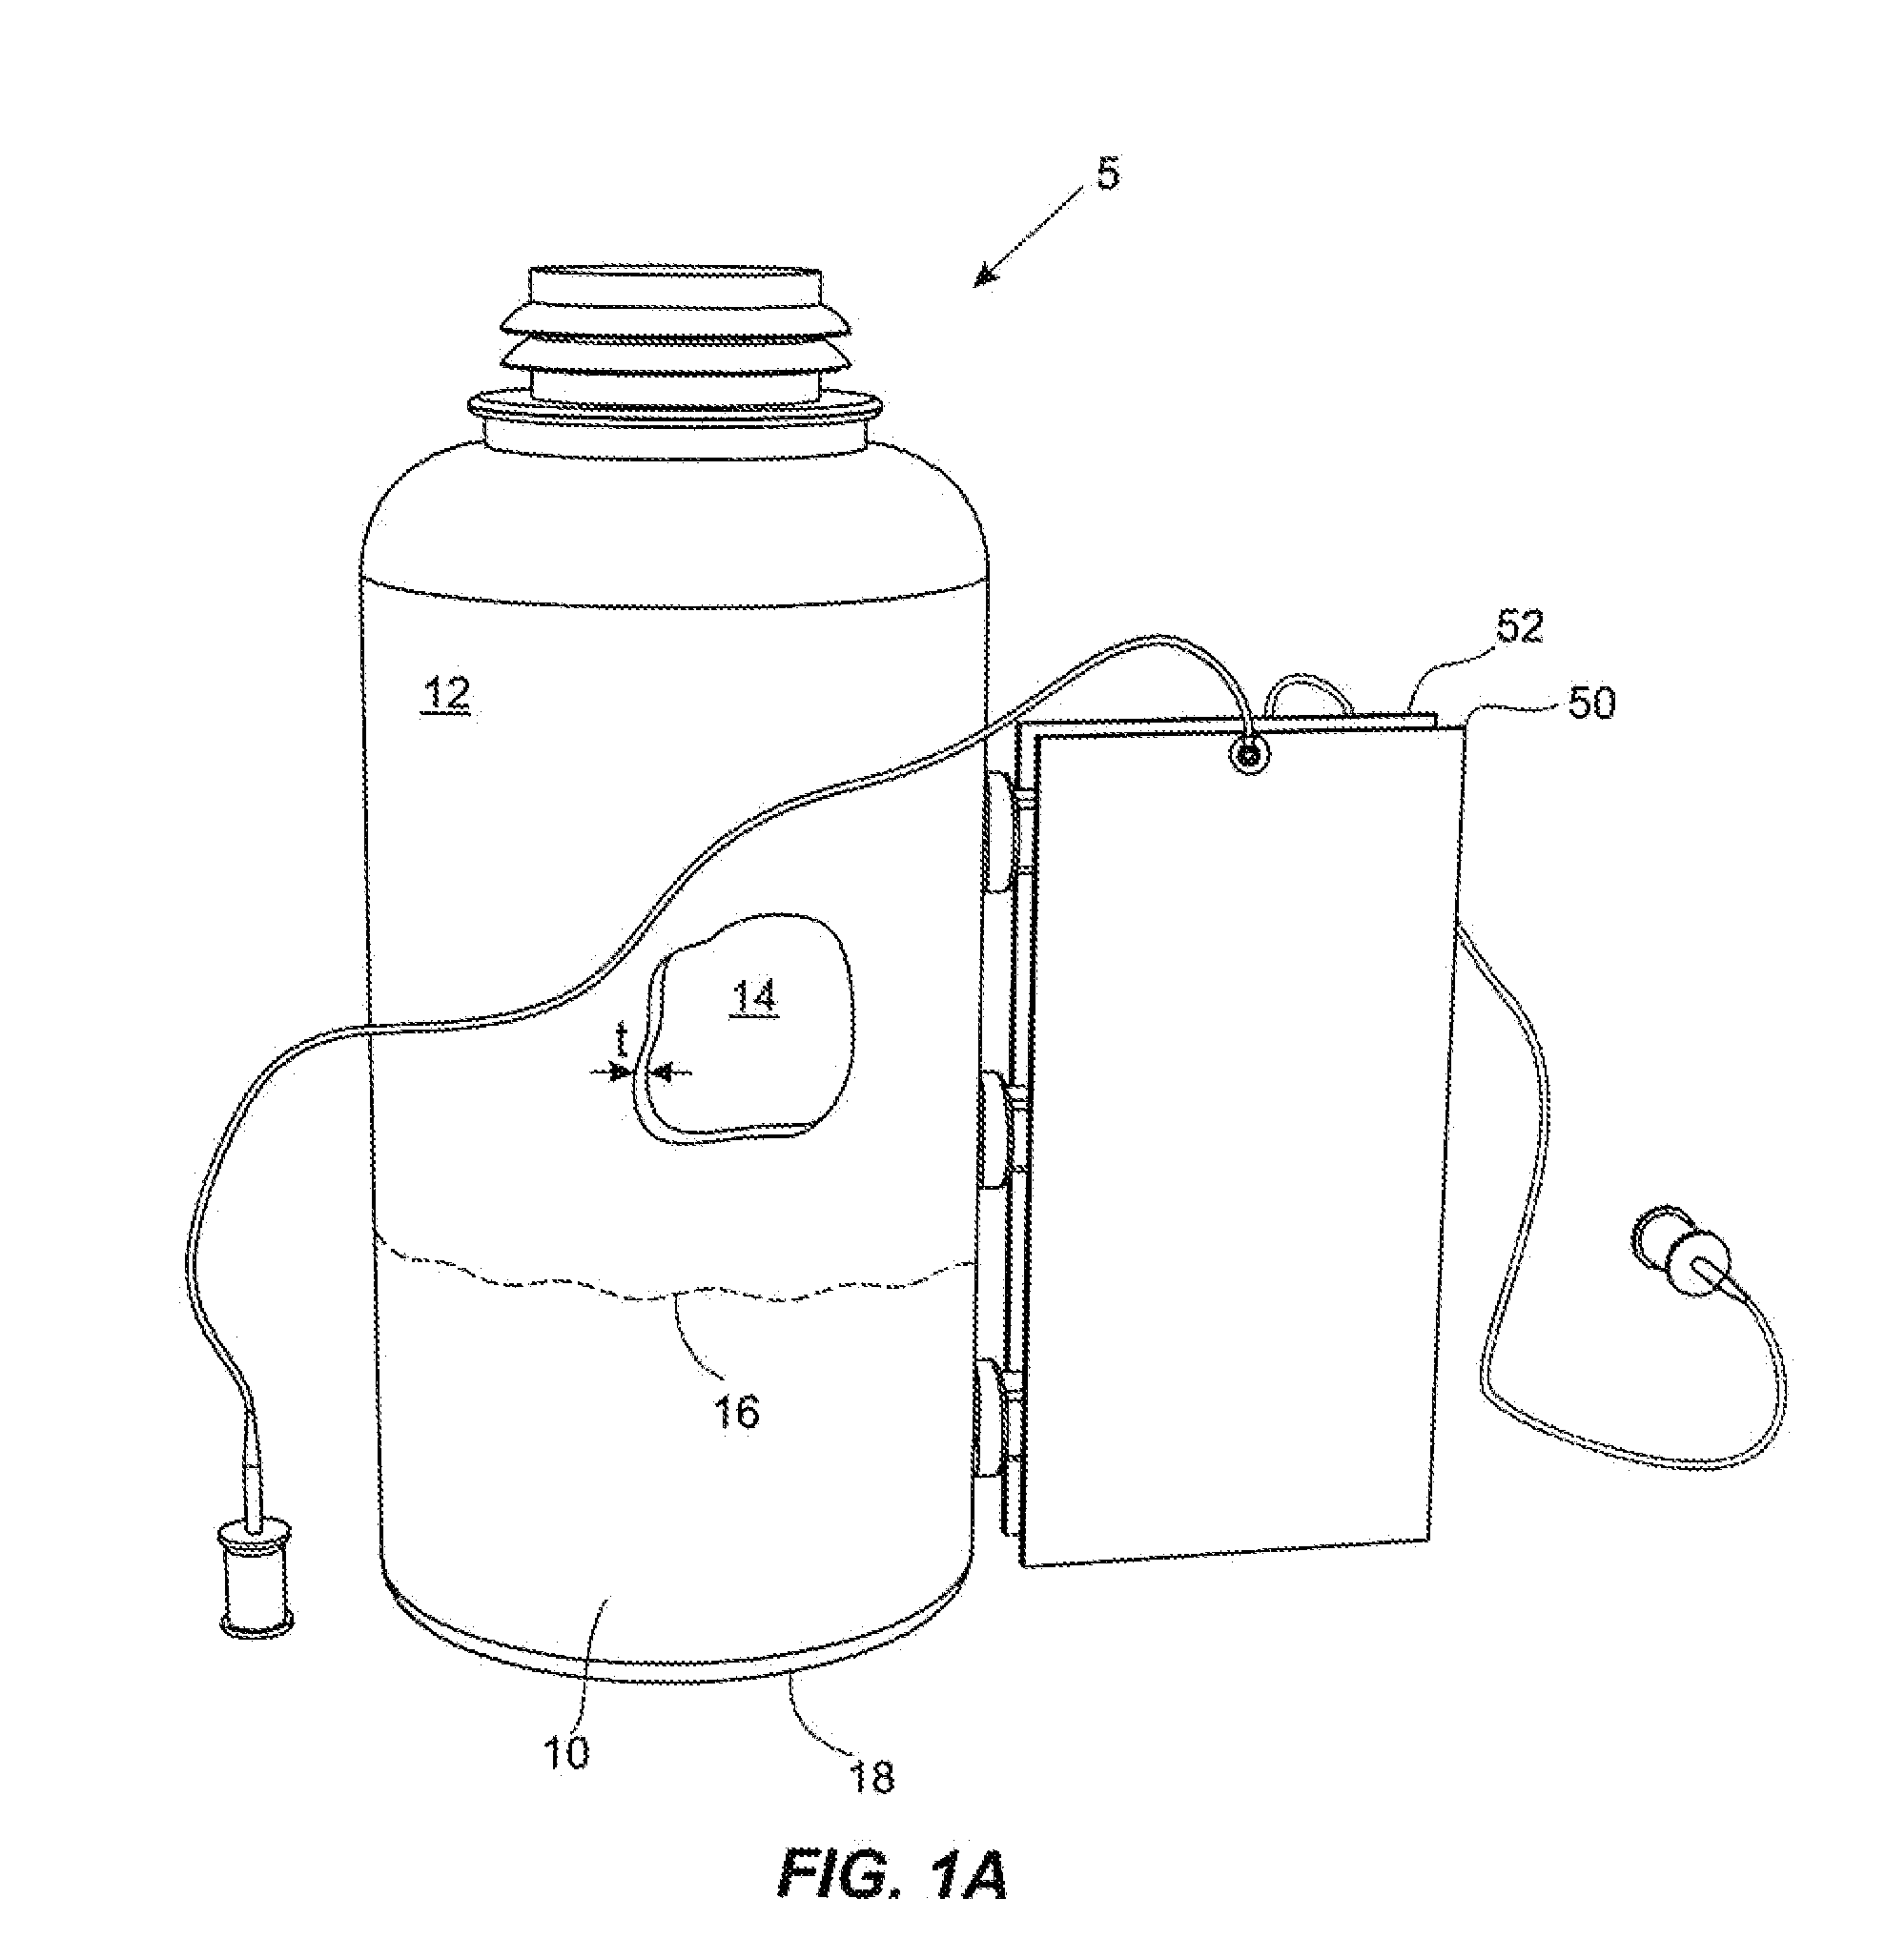 Consumable supply item with capacitive fluid level detection for micro-fluid applications